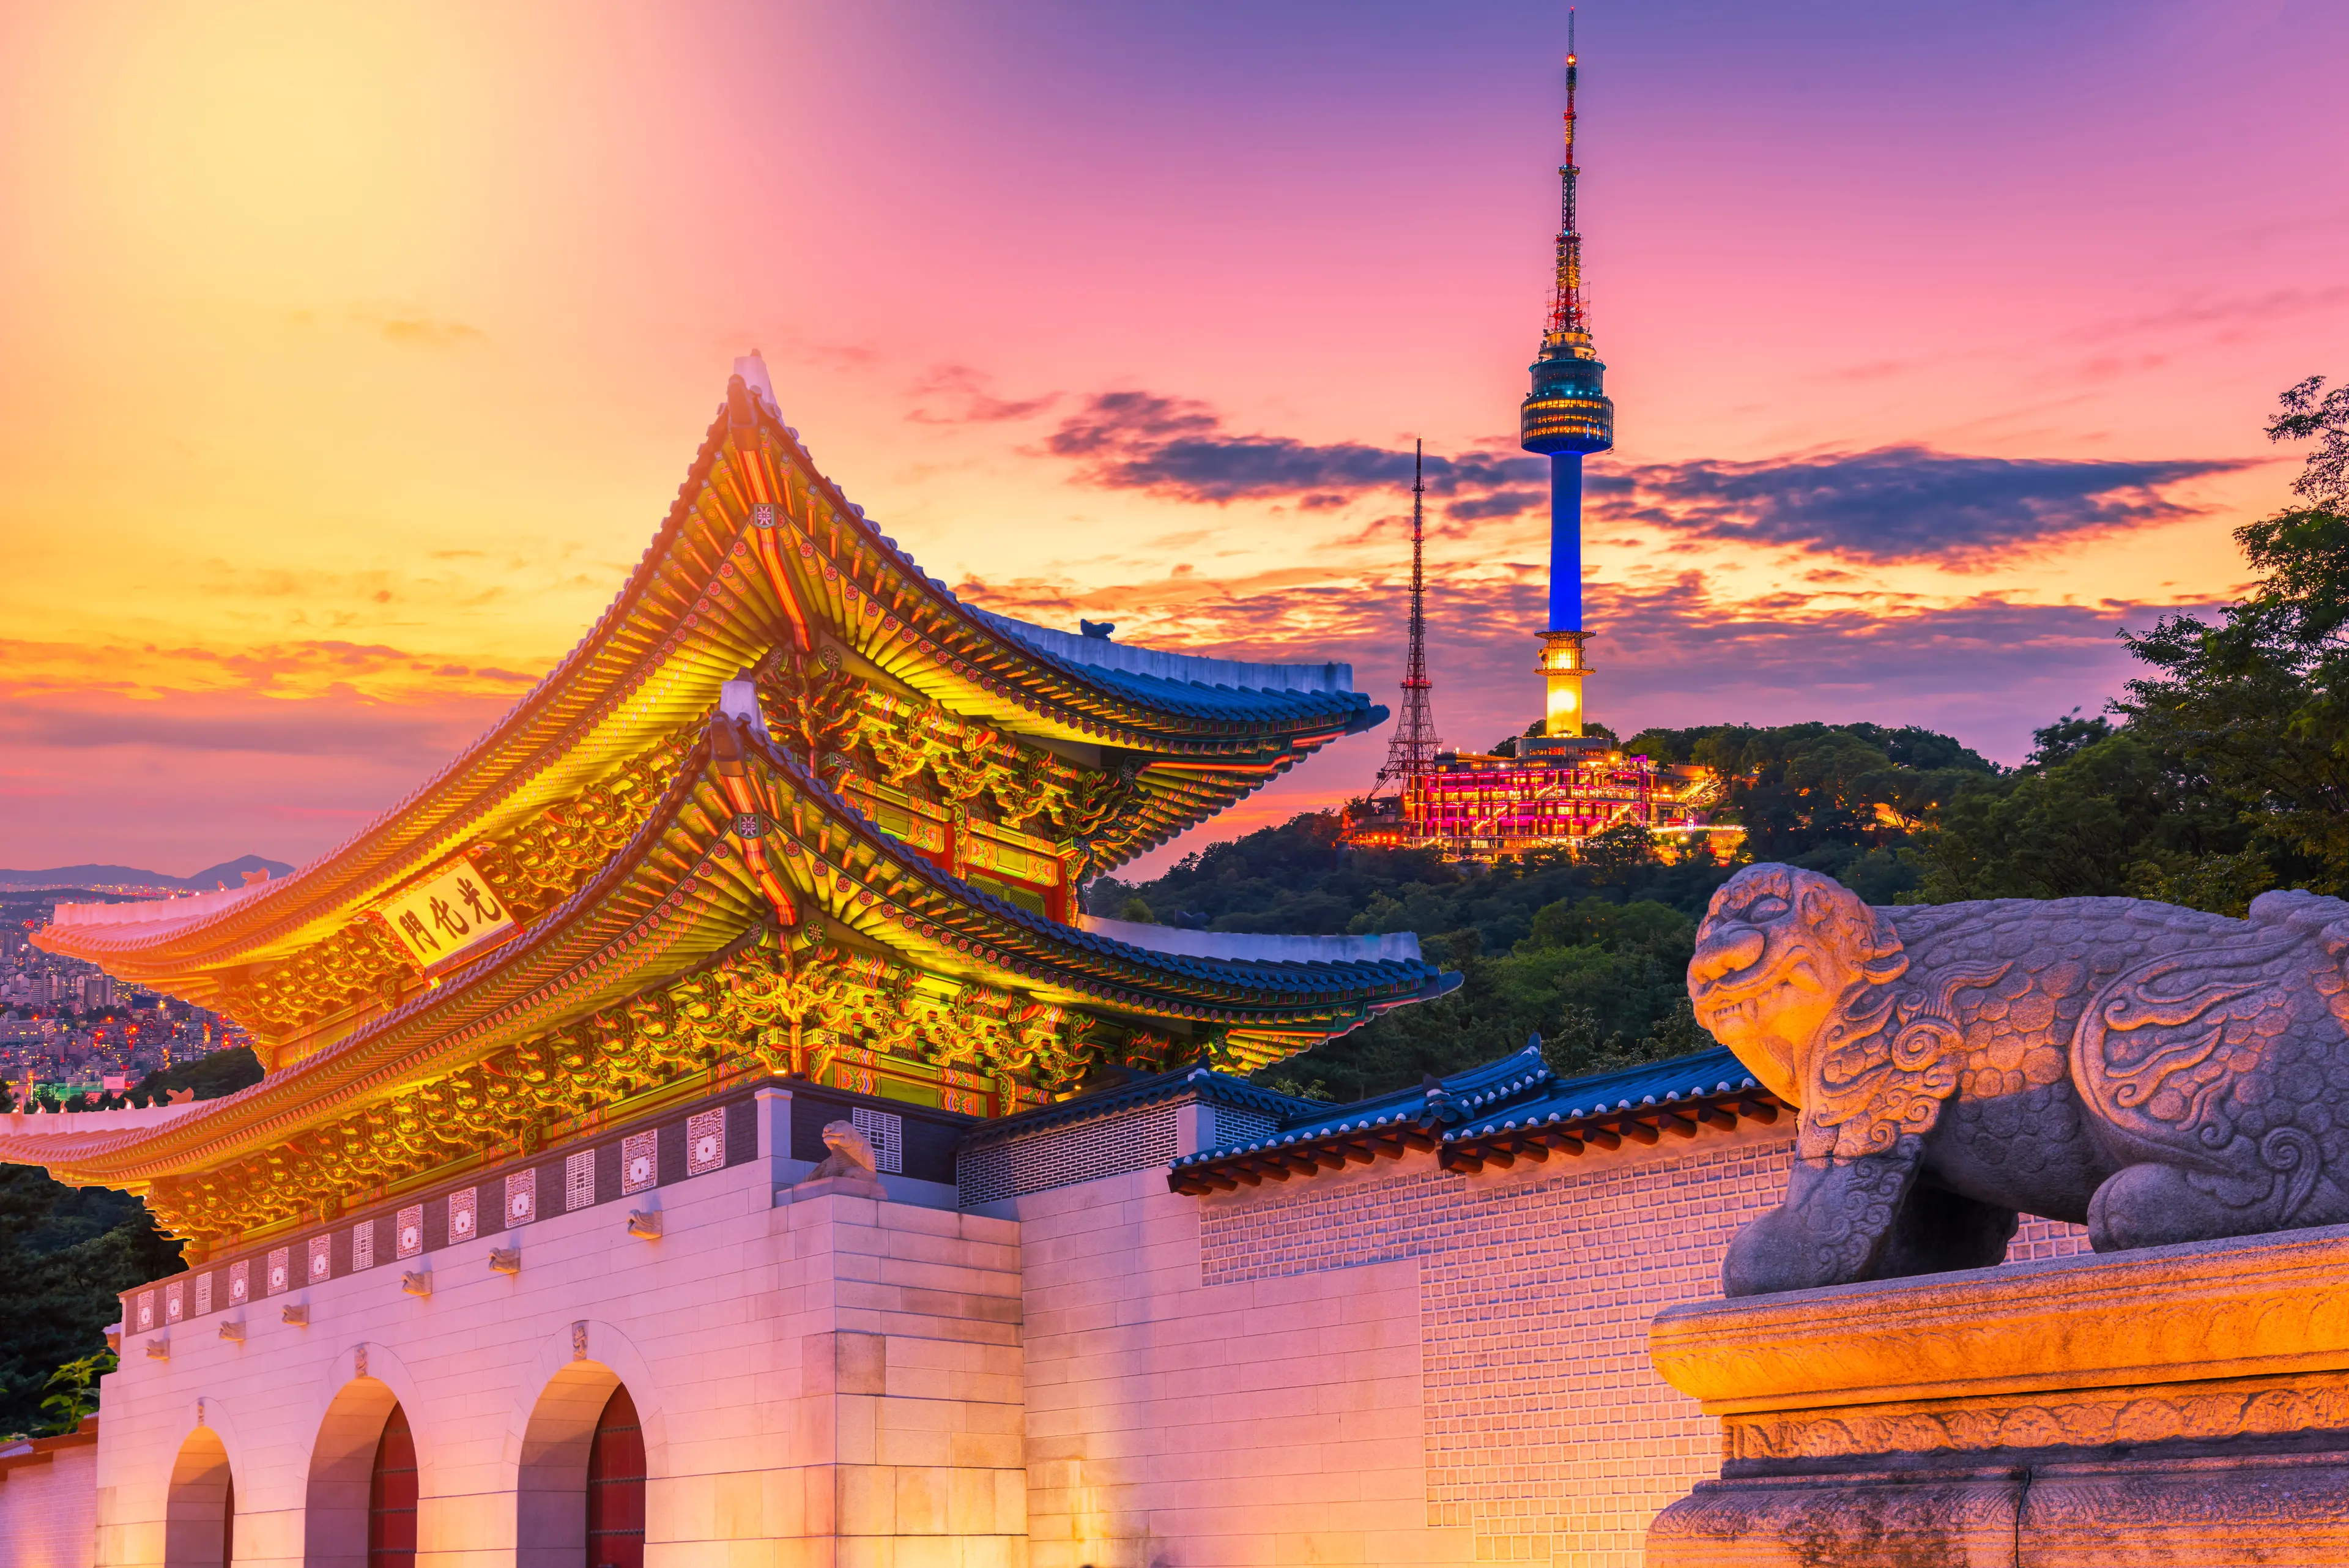 2-Day Solo Food, Wine & Nightlife Adventure in Seoul